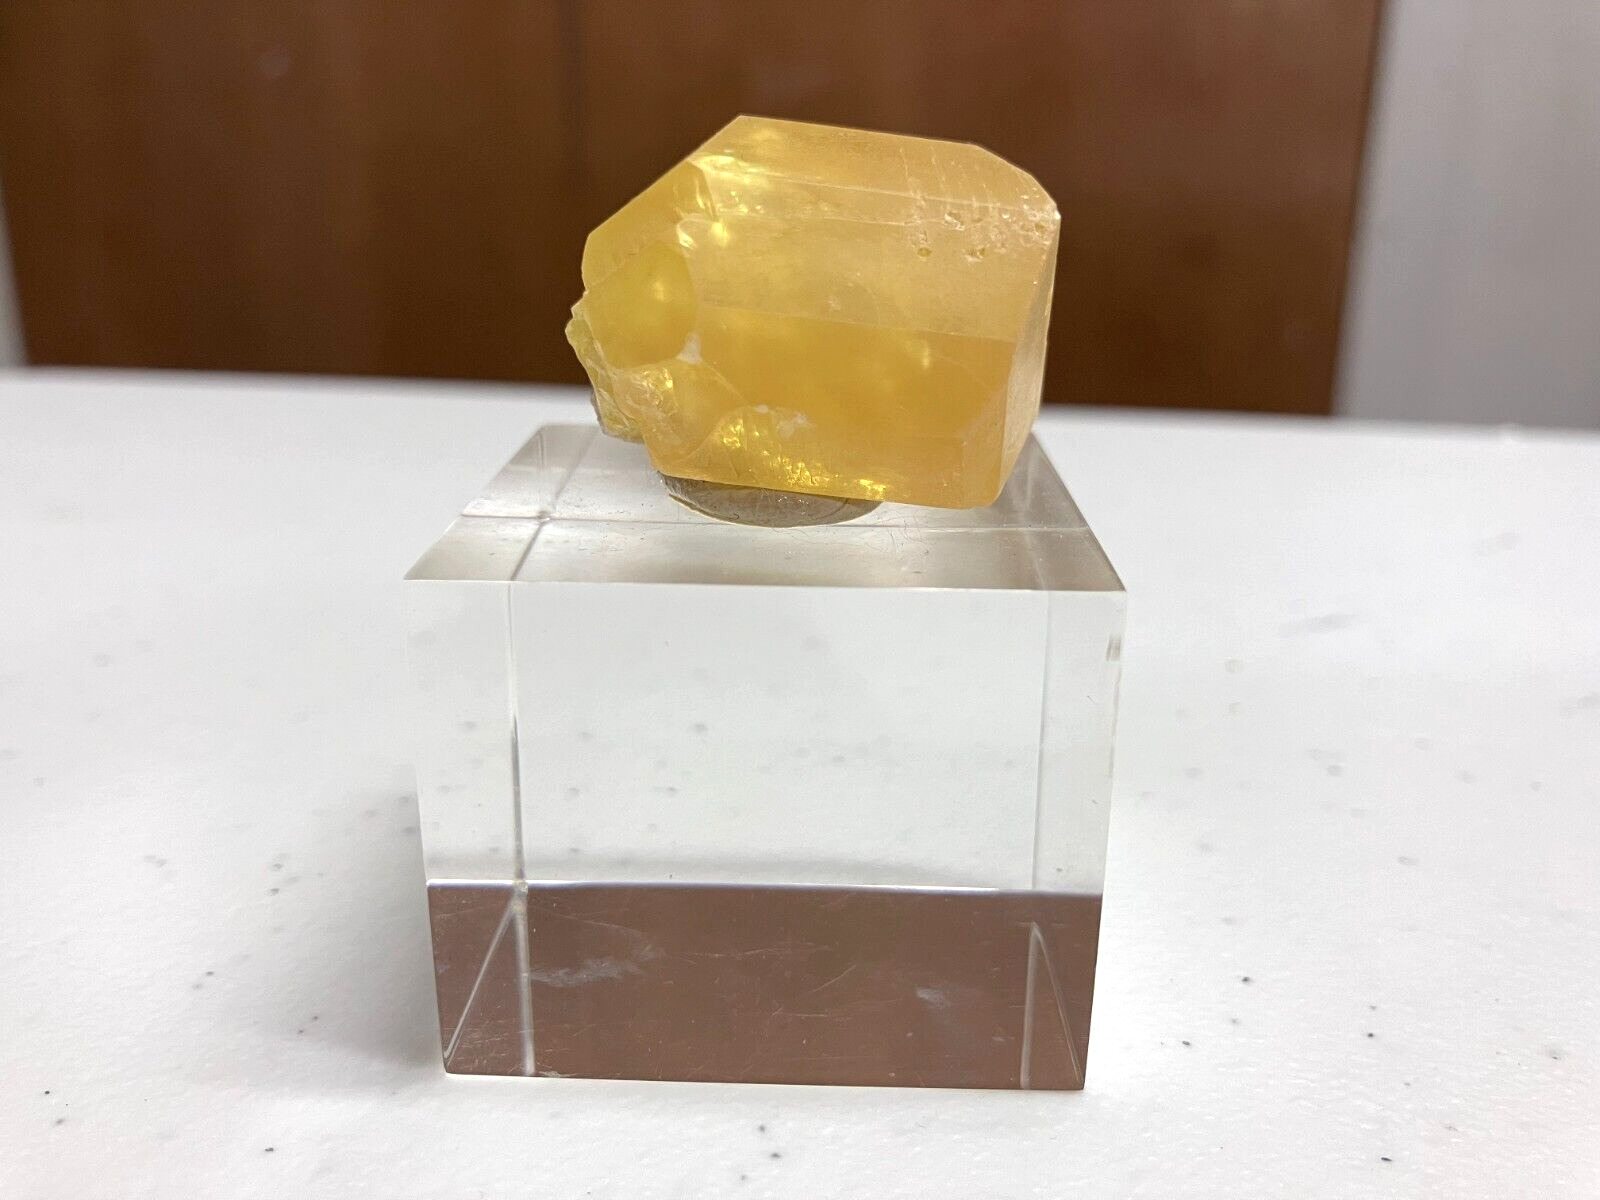 Genuine Pure Sulfur Crystal on Lucite Cube